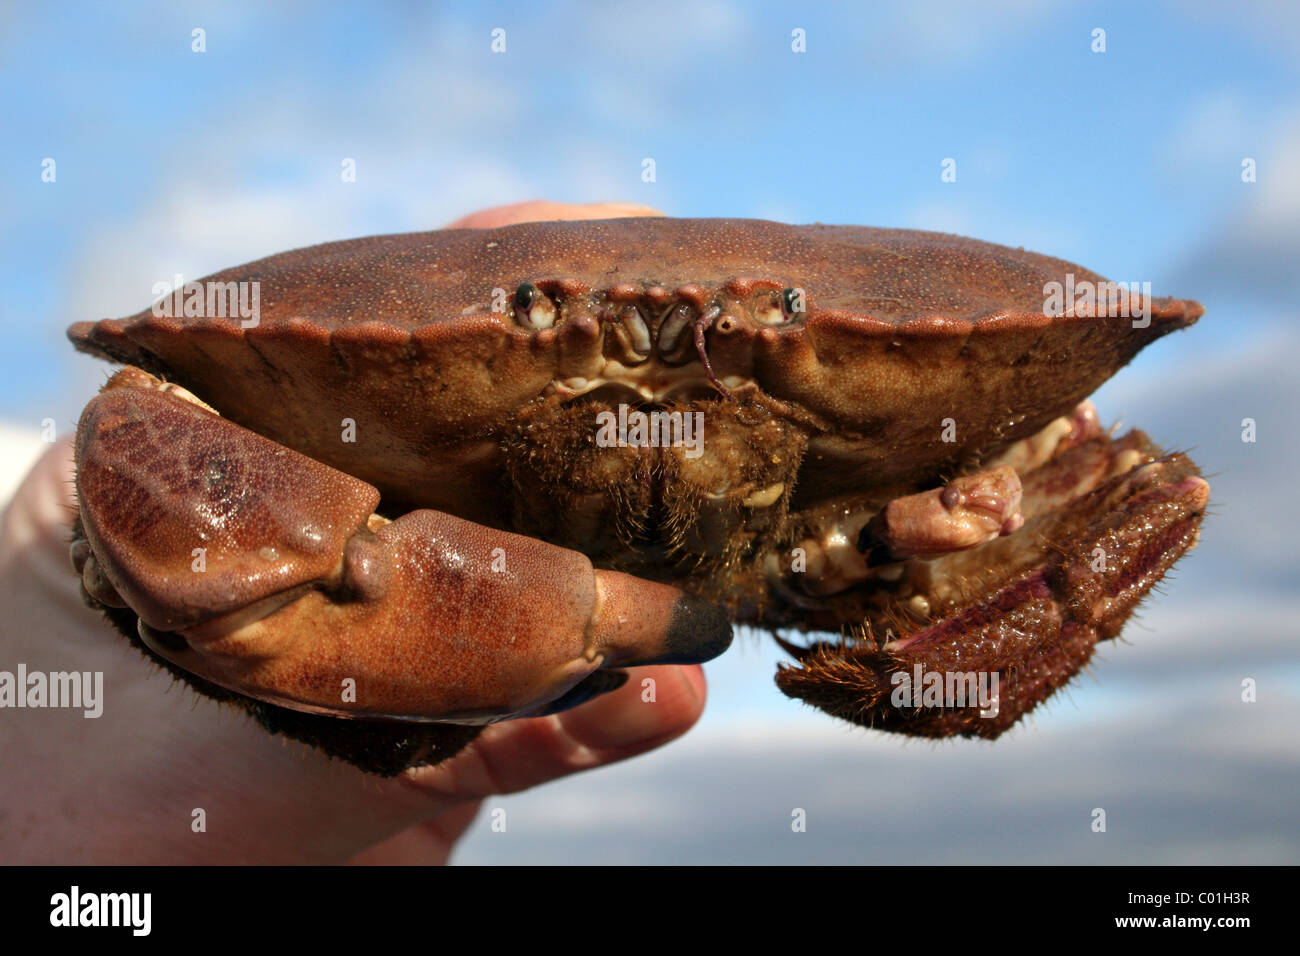 Male Edible Crab Cancer pagurus Caught During Beamtrawling In The River Mersey, Liverpool, UK Stock Photo